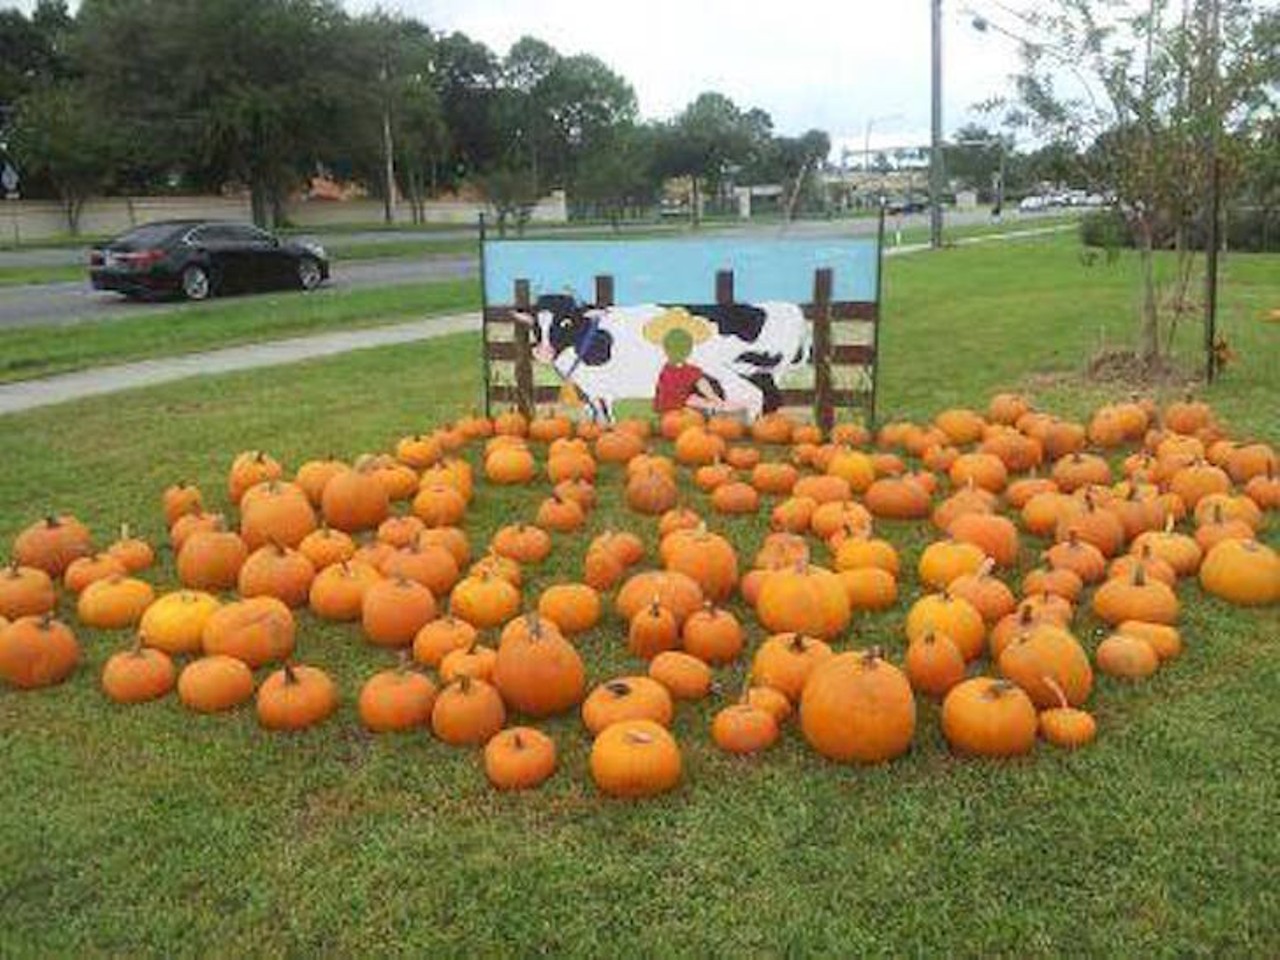 Central Parkway Baptist Church
5281 Central Florida Parkway, 407-352-8664 
Pumpkins will be available Oct. 12-31, so come out with your friends and family to pick the best one! 
Photo via Central Parkway Baptist Church/Facebook